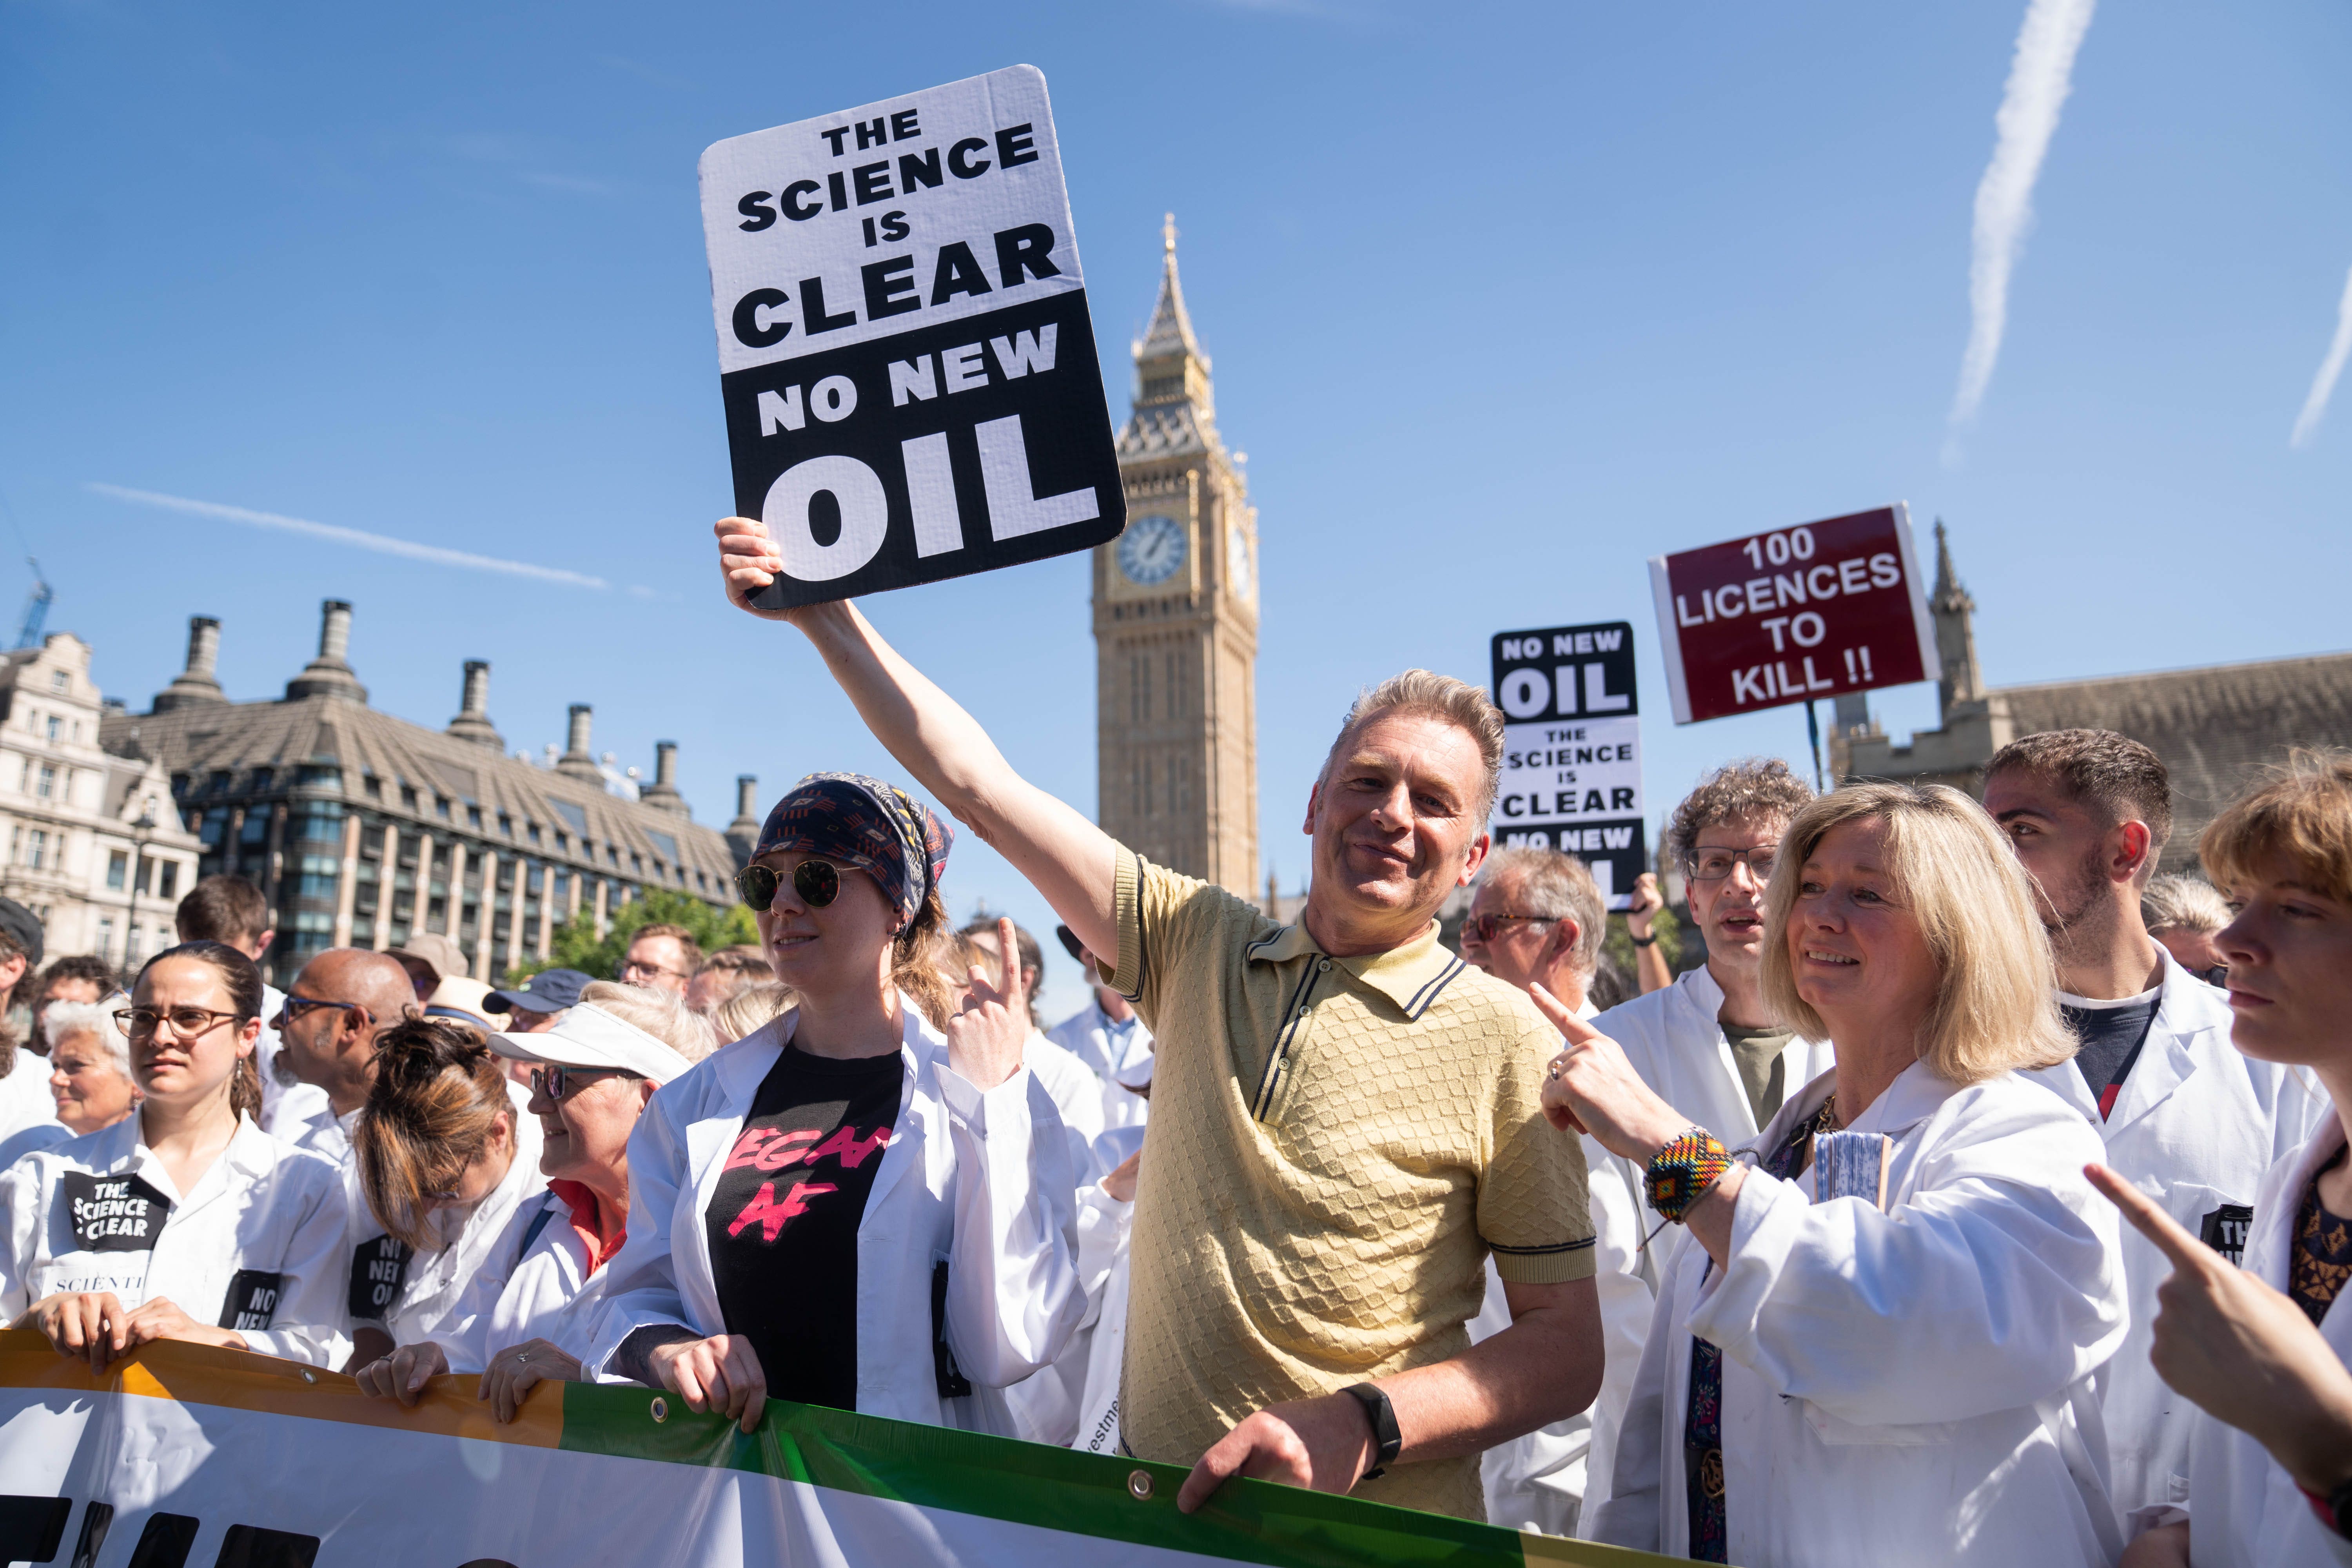 Conservationist and TV presenter Chris Packham led a protest against new oil and gas licences in Westminster on Monday (James Manning/PA)